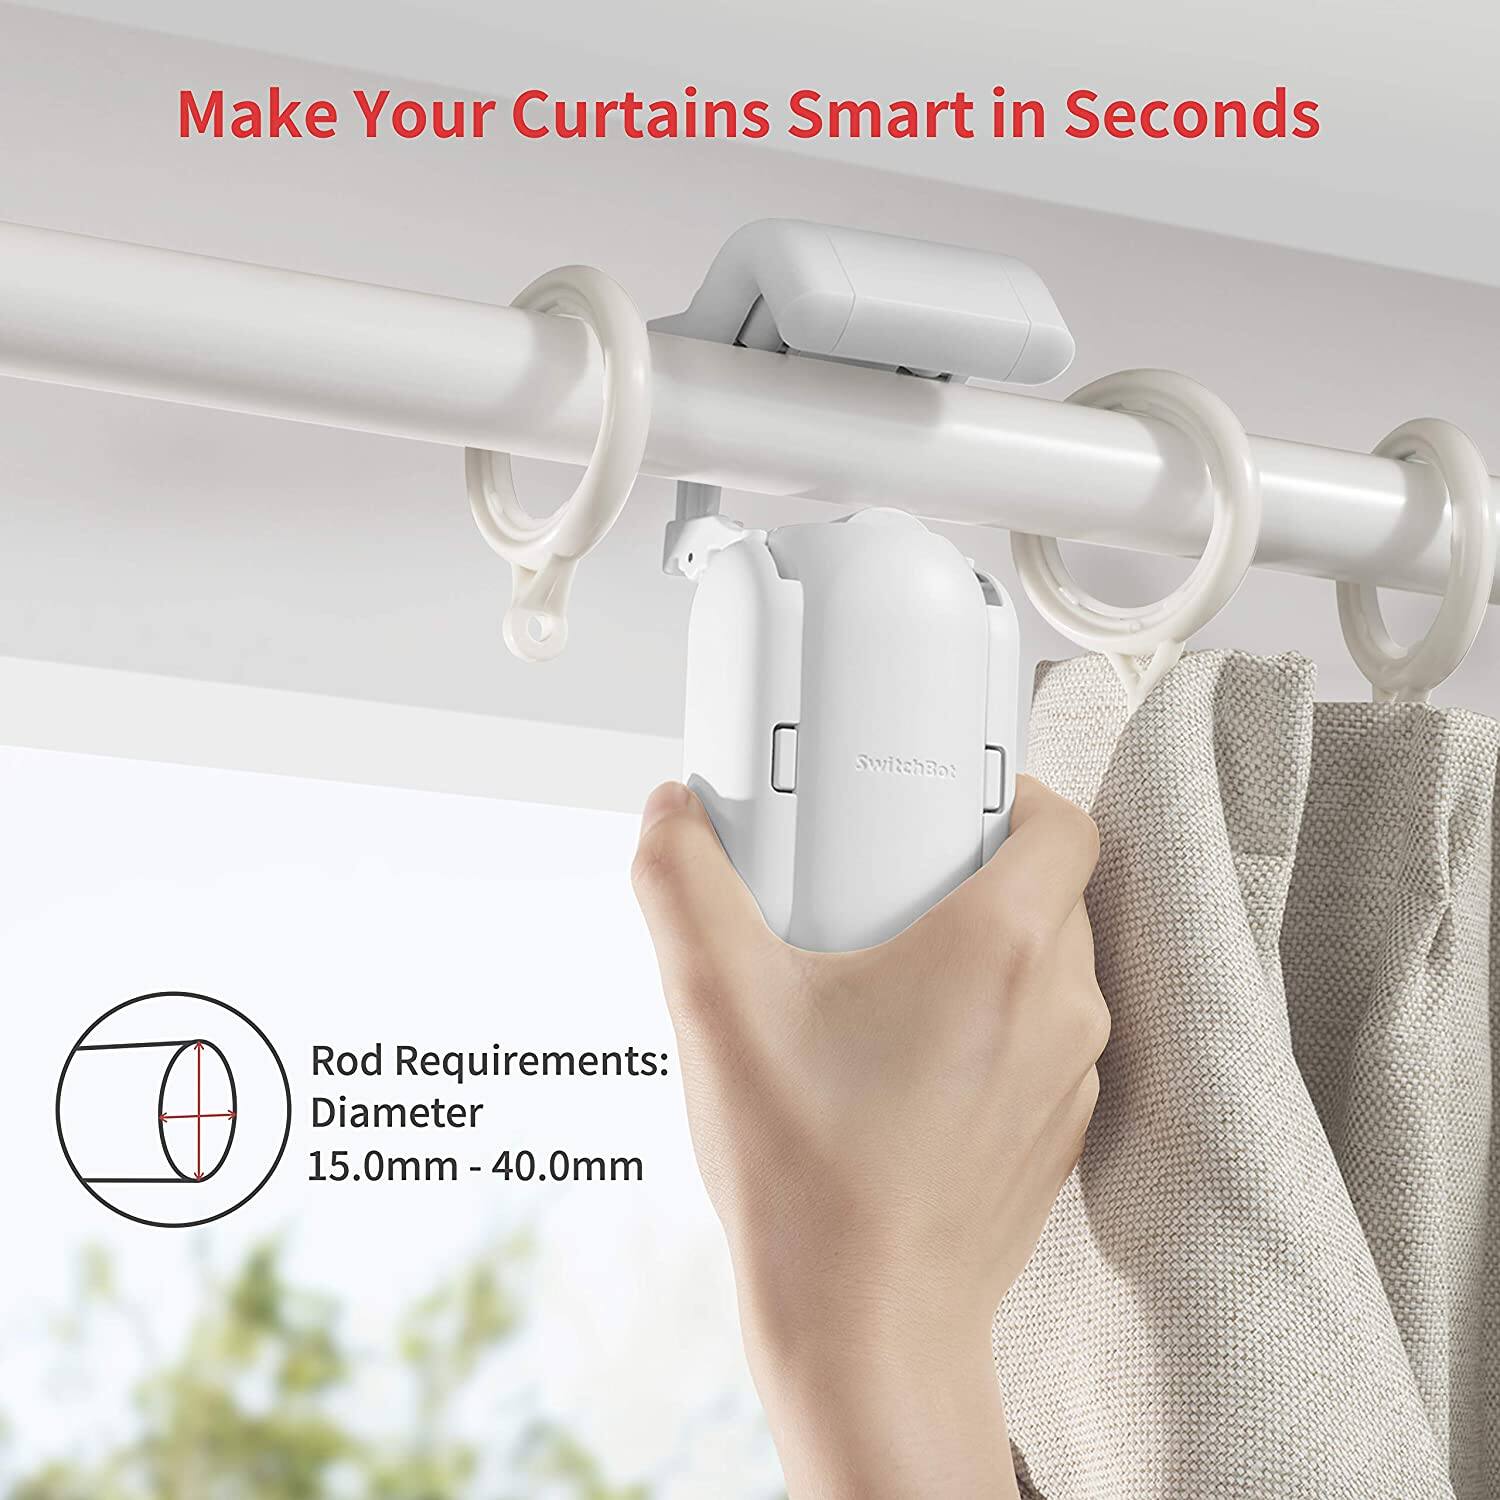 SwitchBot Curtain Smart Electric Motor $65.14 + Free Shipping w/ Prime